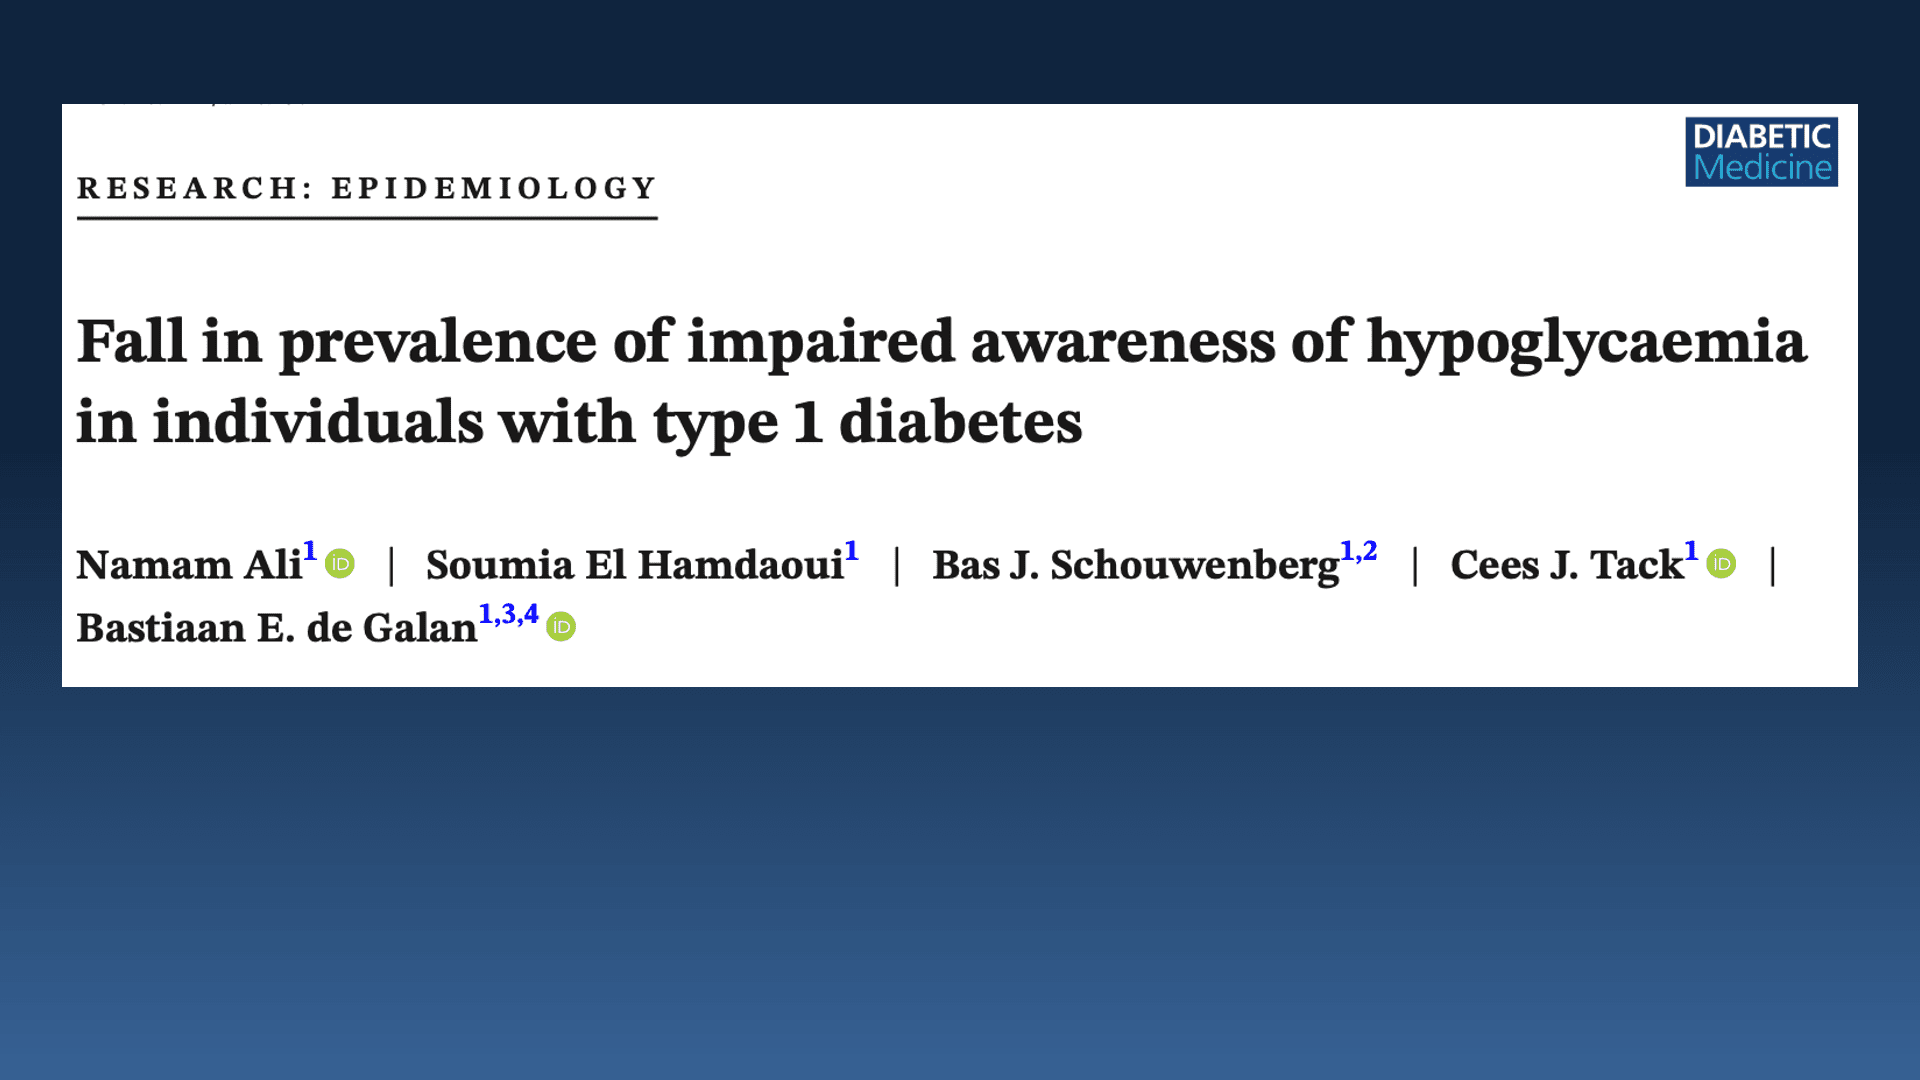 Ali, N, El Hamdaoui, S, Schouwenberg, BJ, Tack, CJ, de Galan, BE. Fall in prevalence of impaired awareness of hypoglycaemia in individuals with type 1 diabetes. Diabet Med. 2023; 40:e15042. doi:10.1111/dme.15042